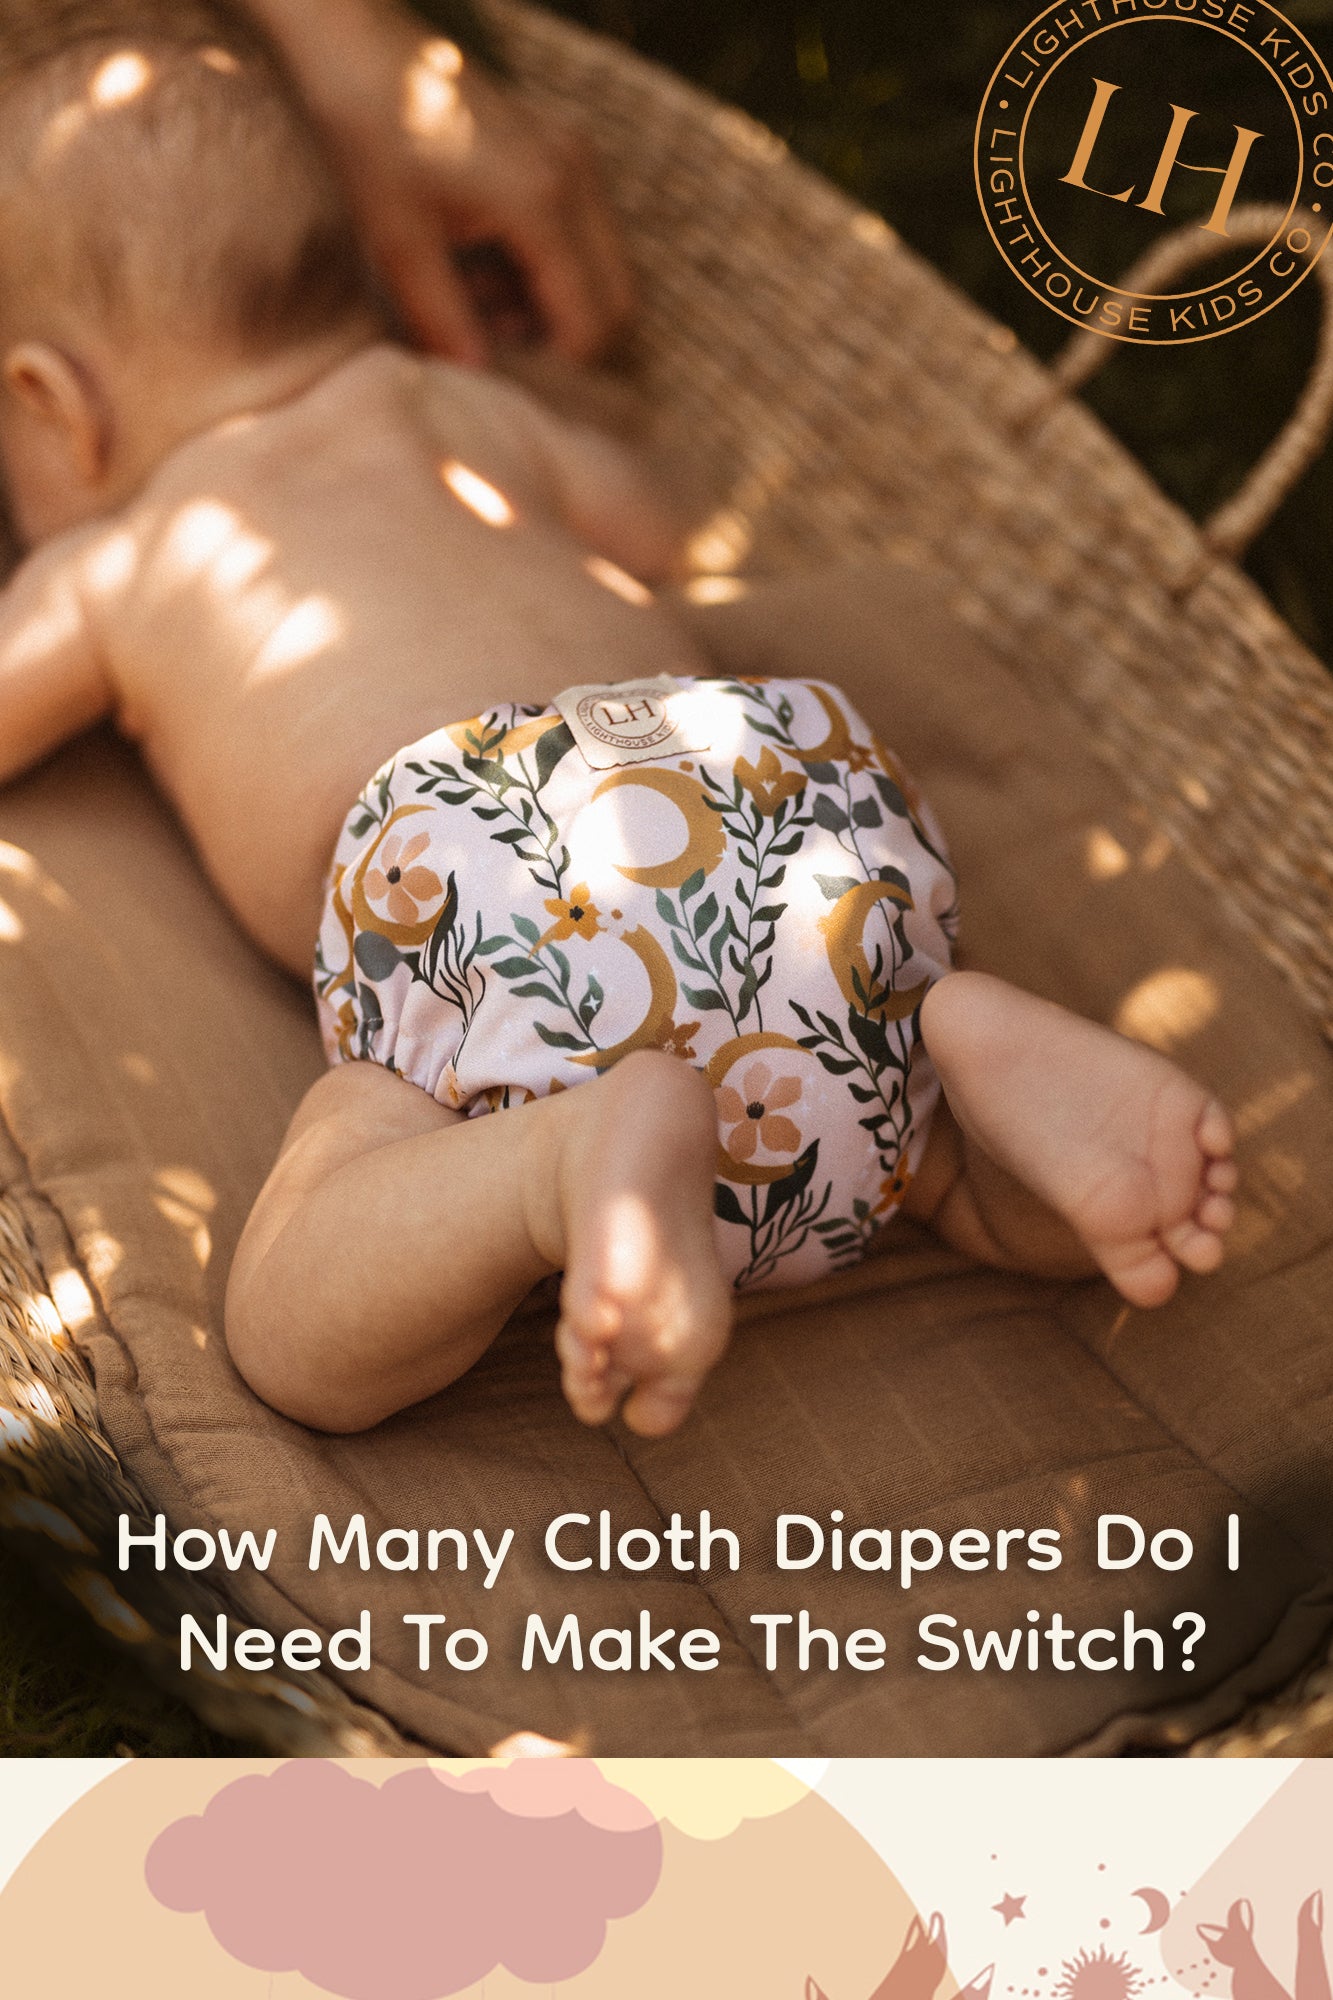 How Many Cloth Diapers do You Need To Make The Switch